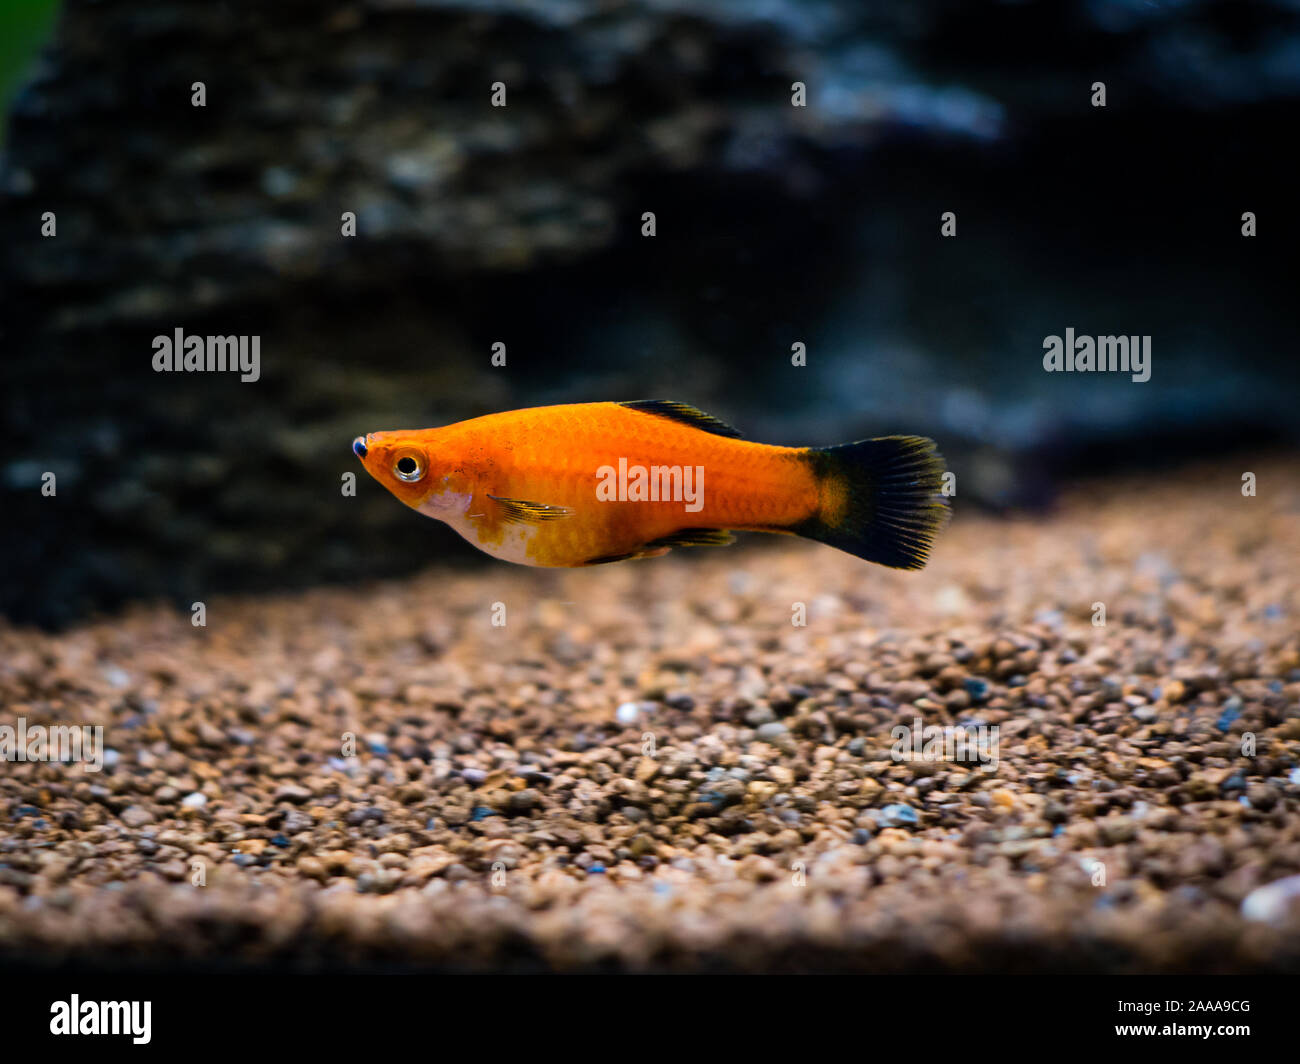 Red Wagtail Platy (Xiphophorus maculatus) in a fish tank Stock Photo - Alamy